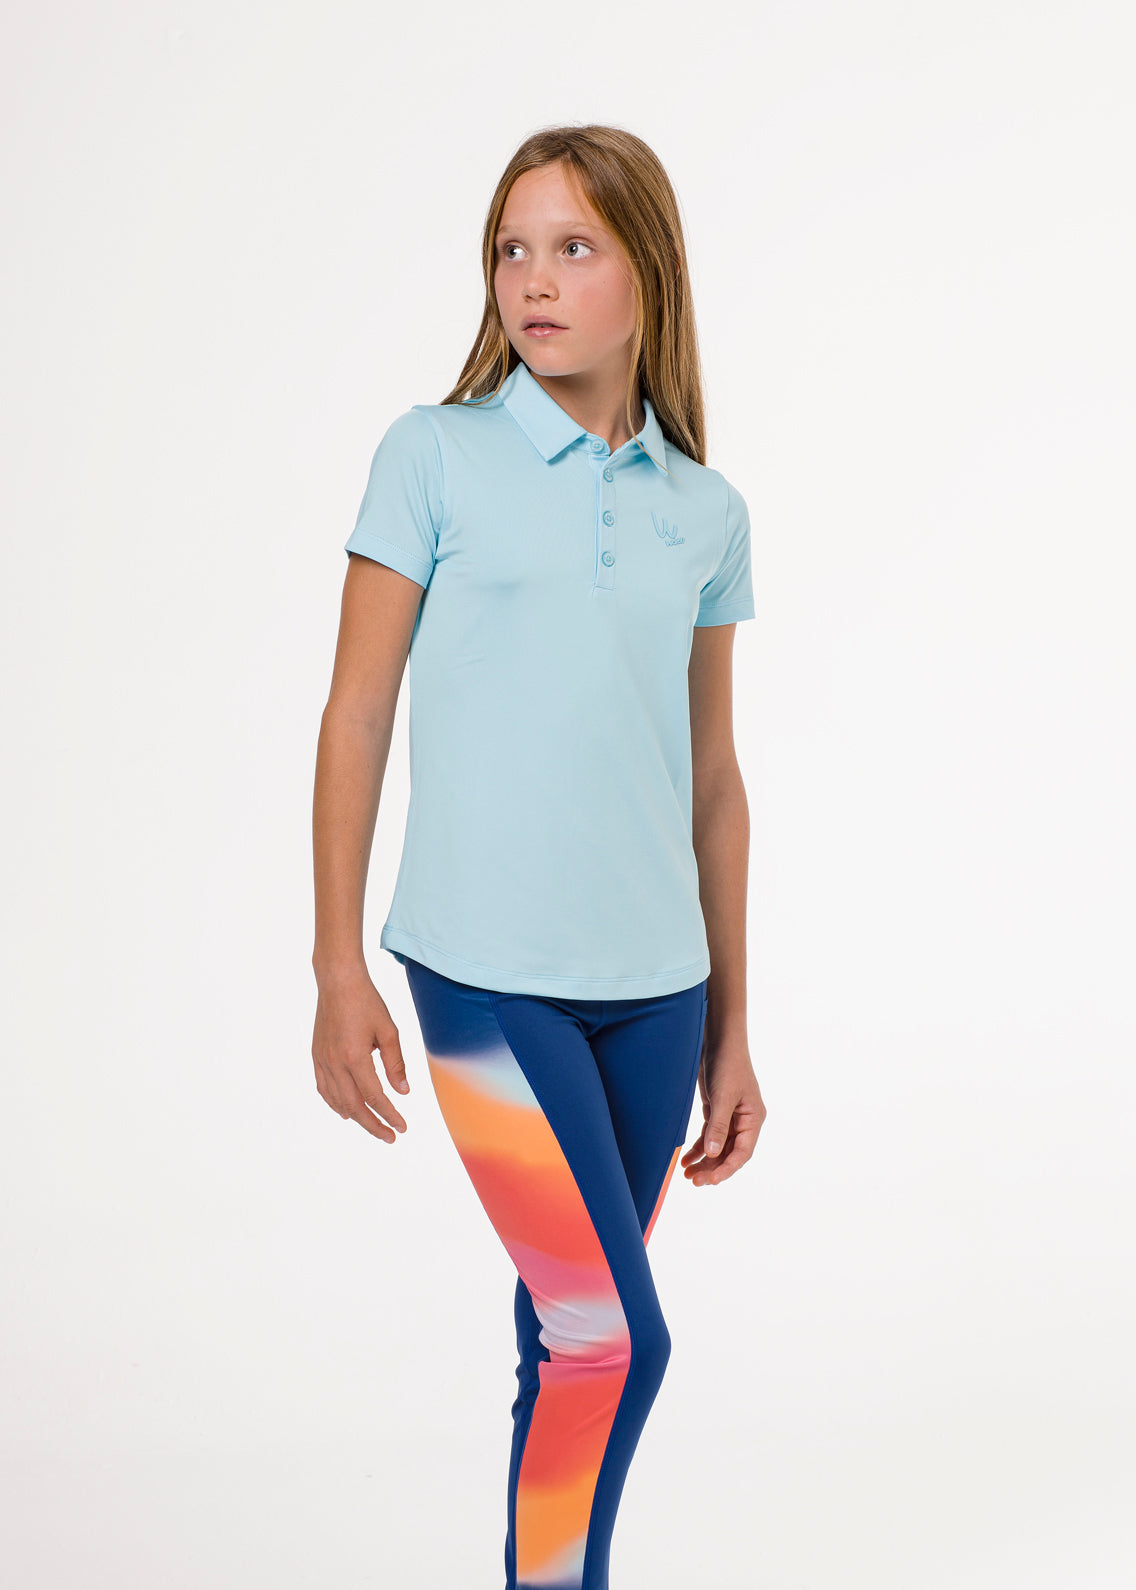 Navy blue golf base layer leggings with gradient detail for girls